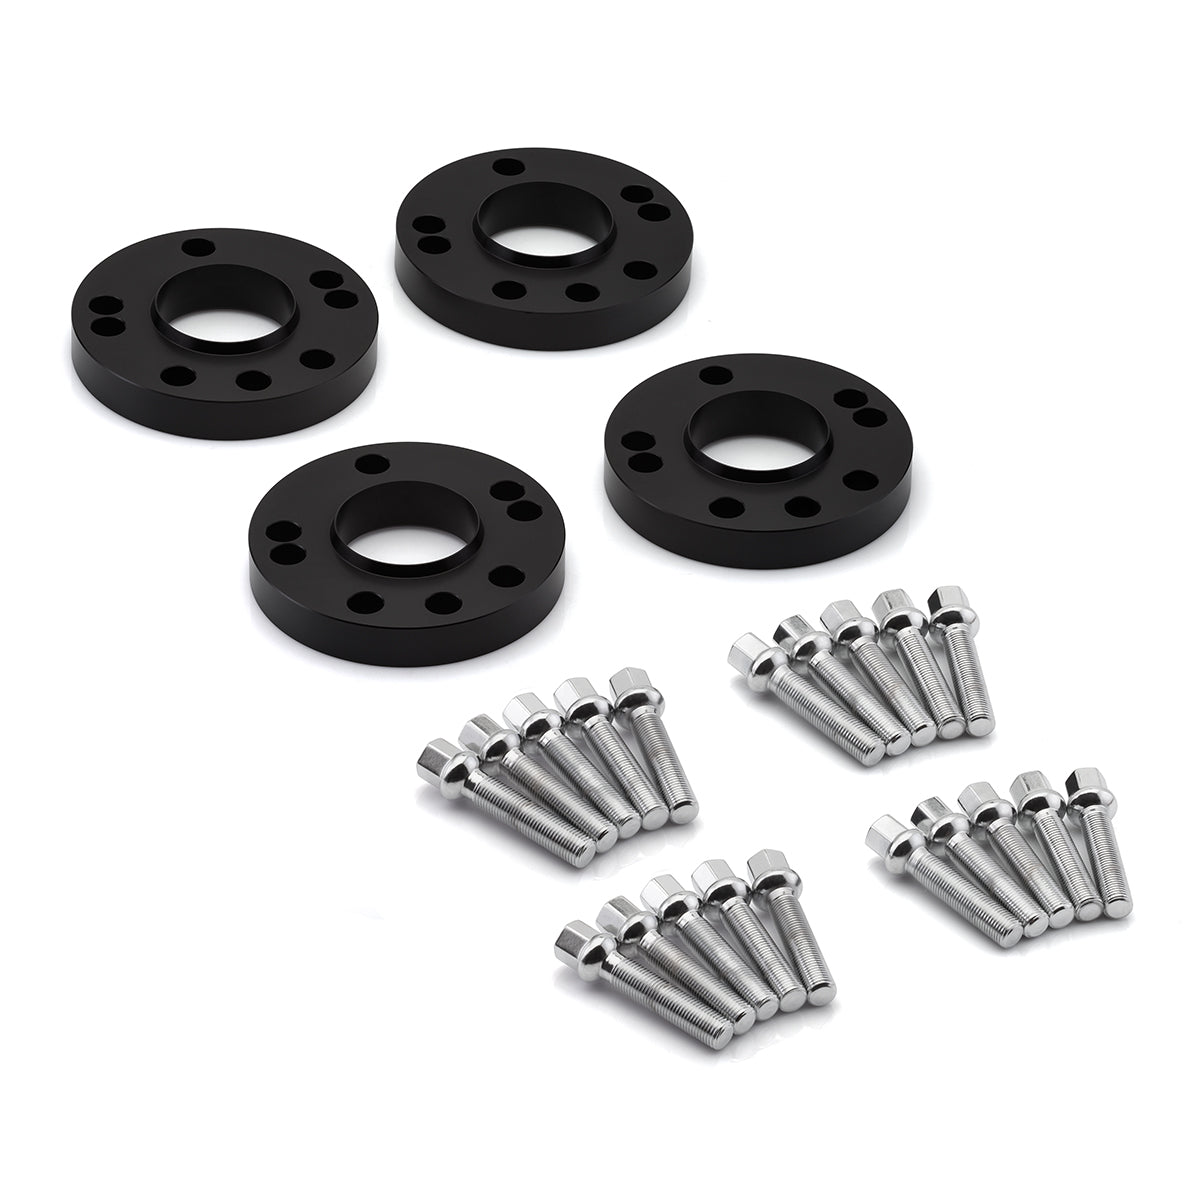 1985-1998 Volkswagen Golf 4x100 57.1 M12 Studs Hubcentric Wheelcentric Wheel Spacers Set of 4-Wheel Spacer-Blackpathinc